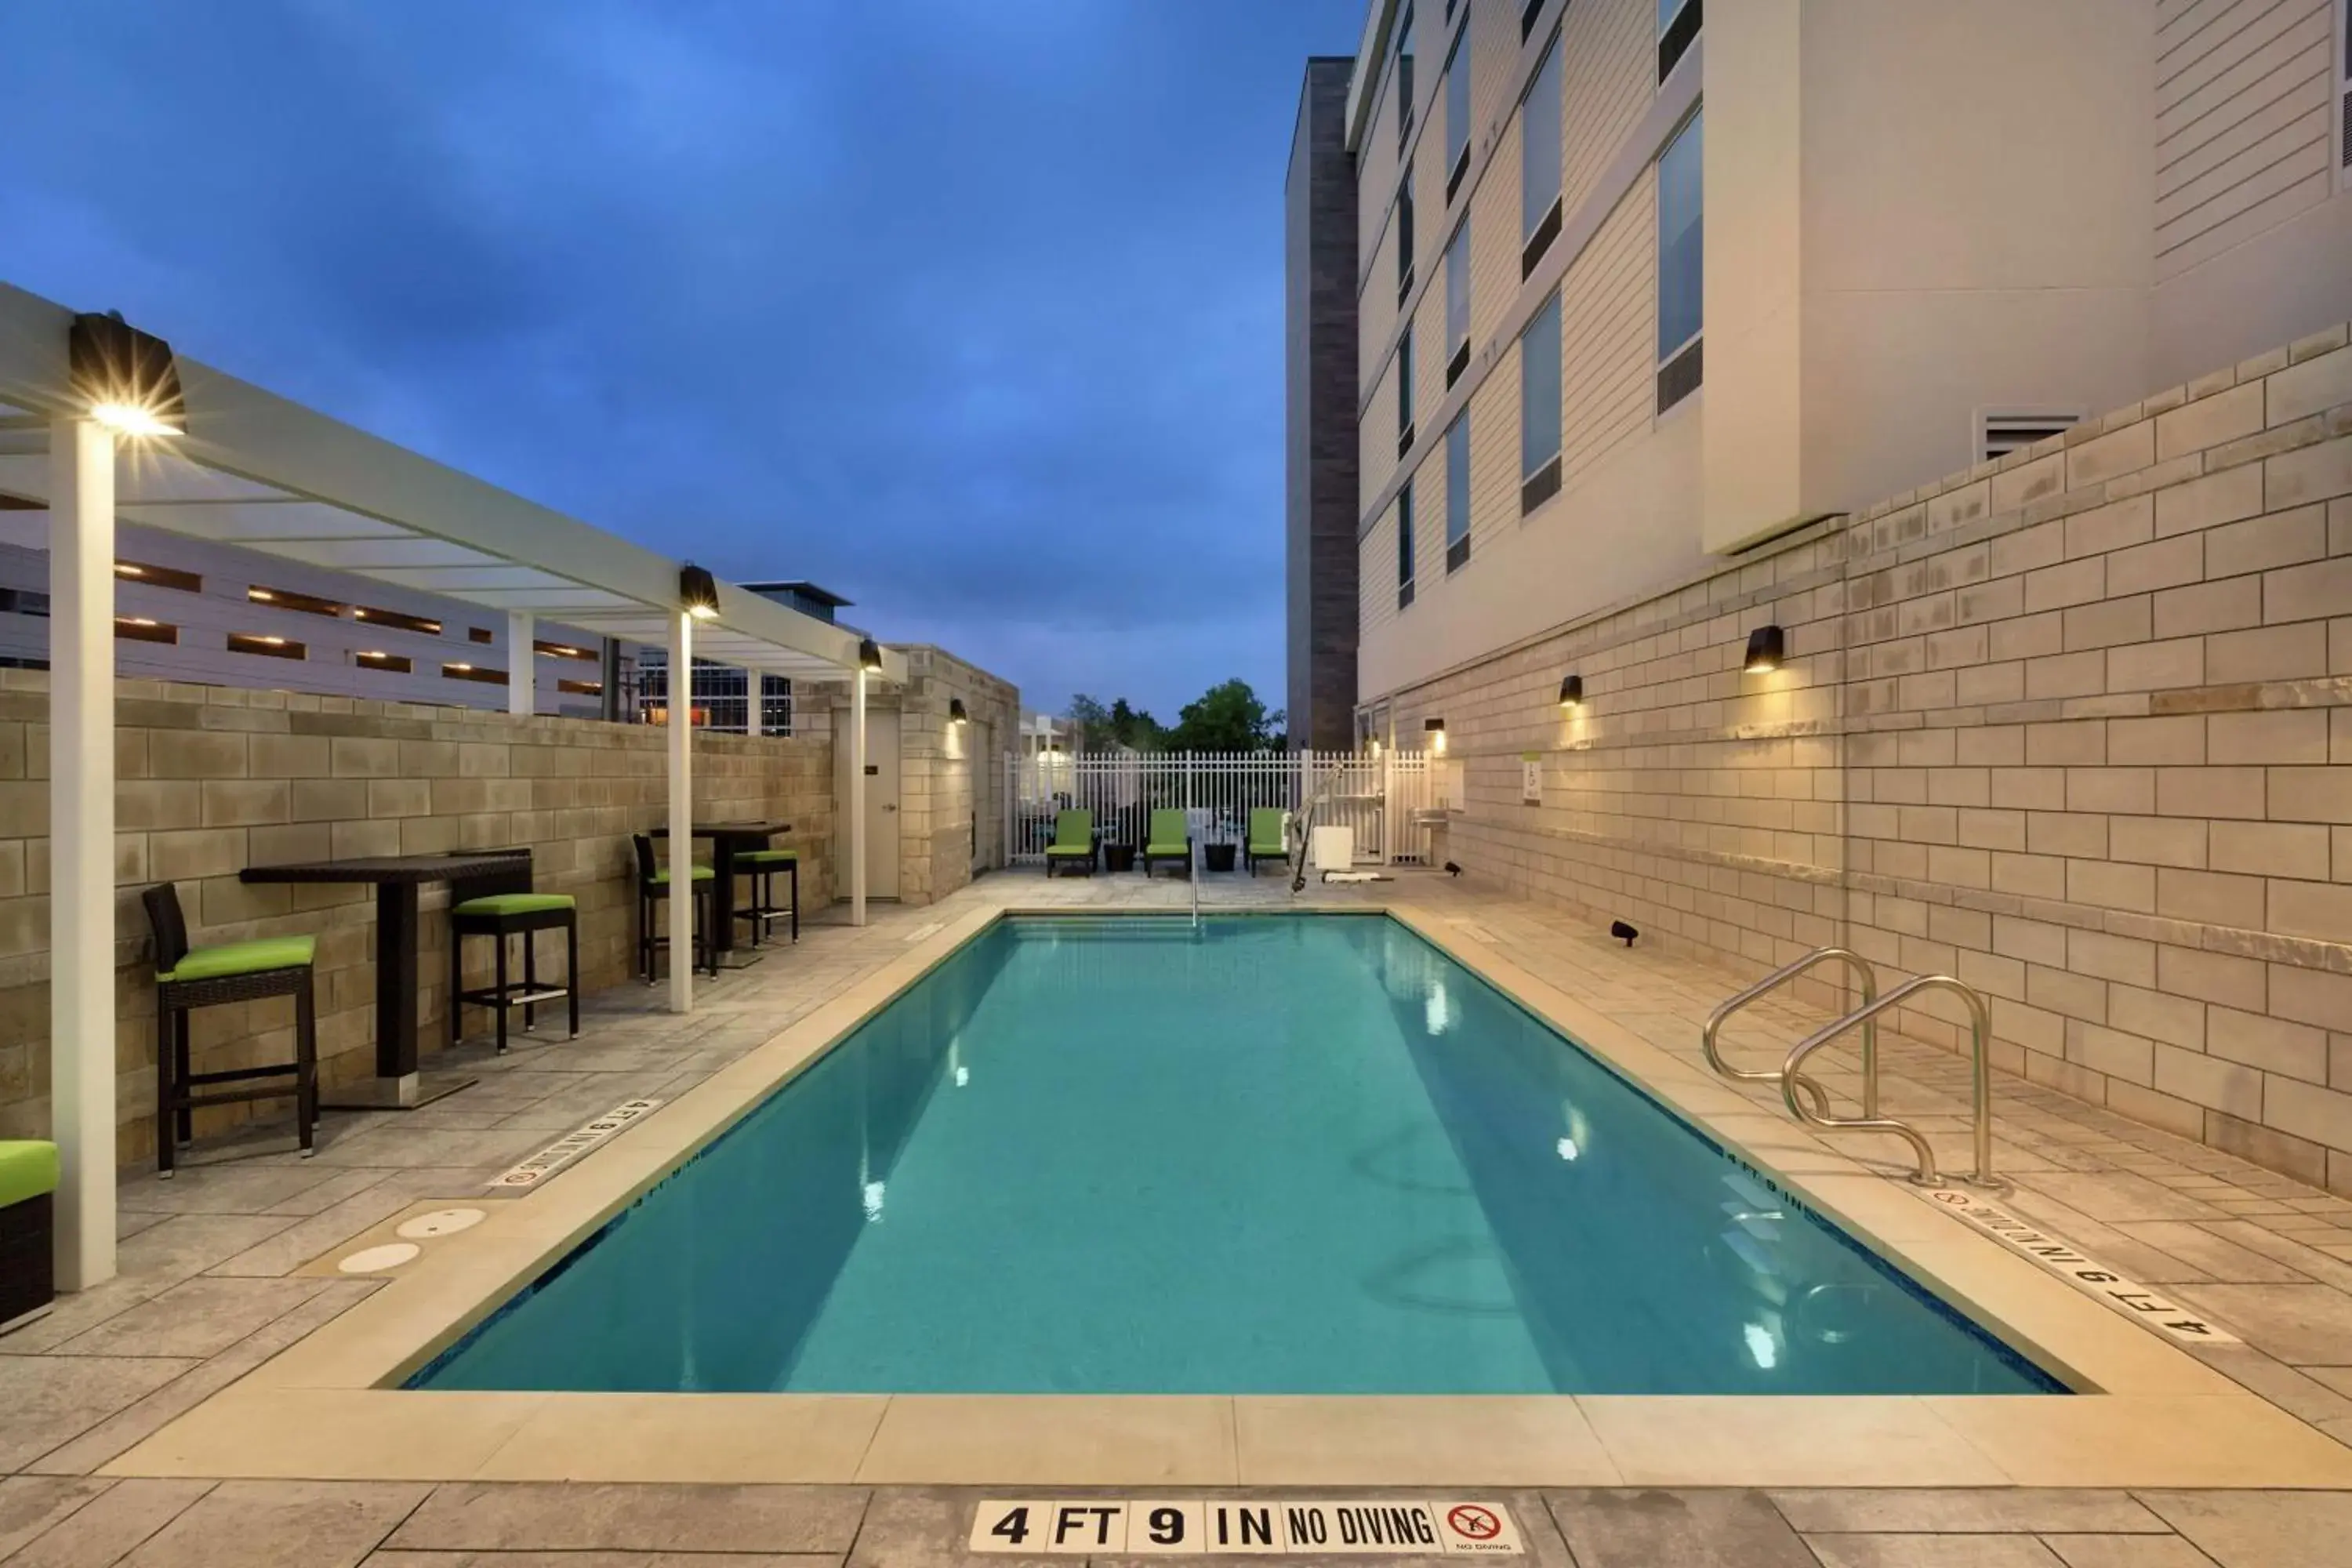 Swimming Pool in Home2 Suites by Hilton Austin North/Near the Domain, TX